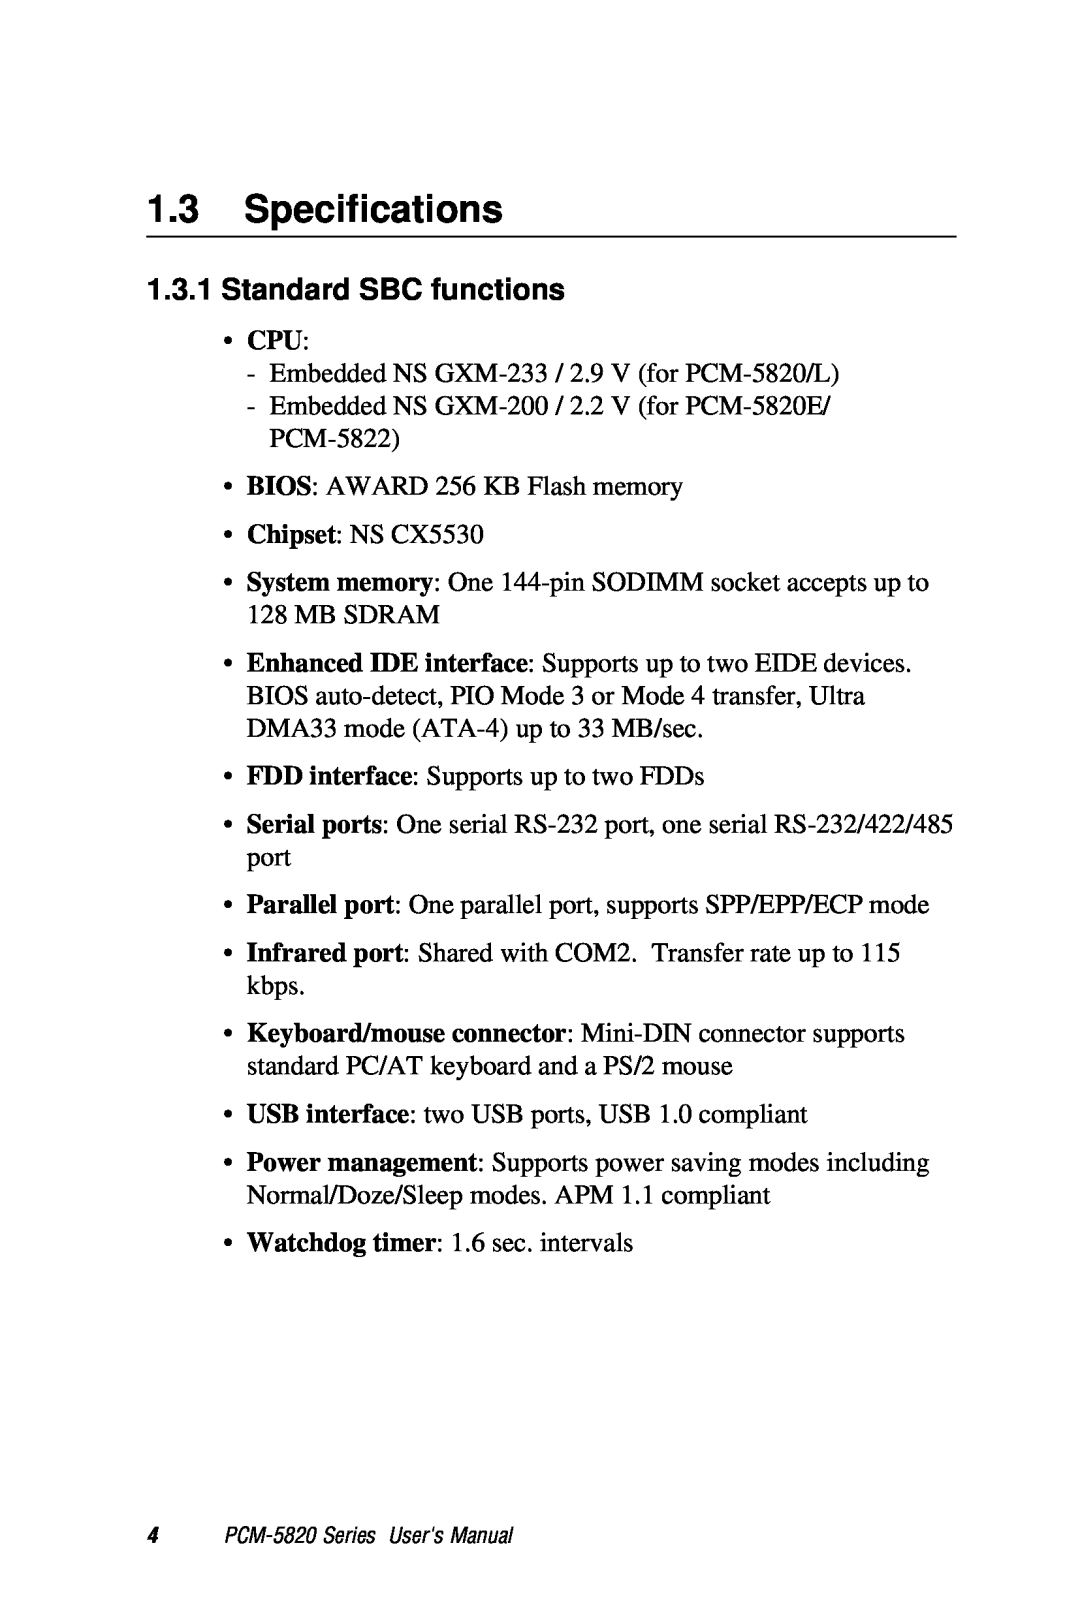 AMD PCM-5820 manual Specifications, Standard SBC functions 